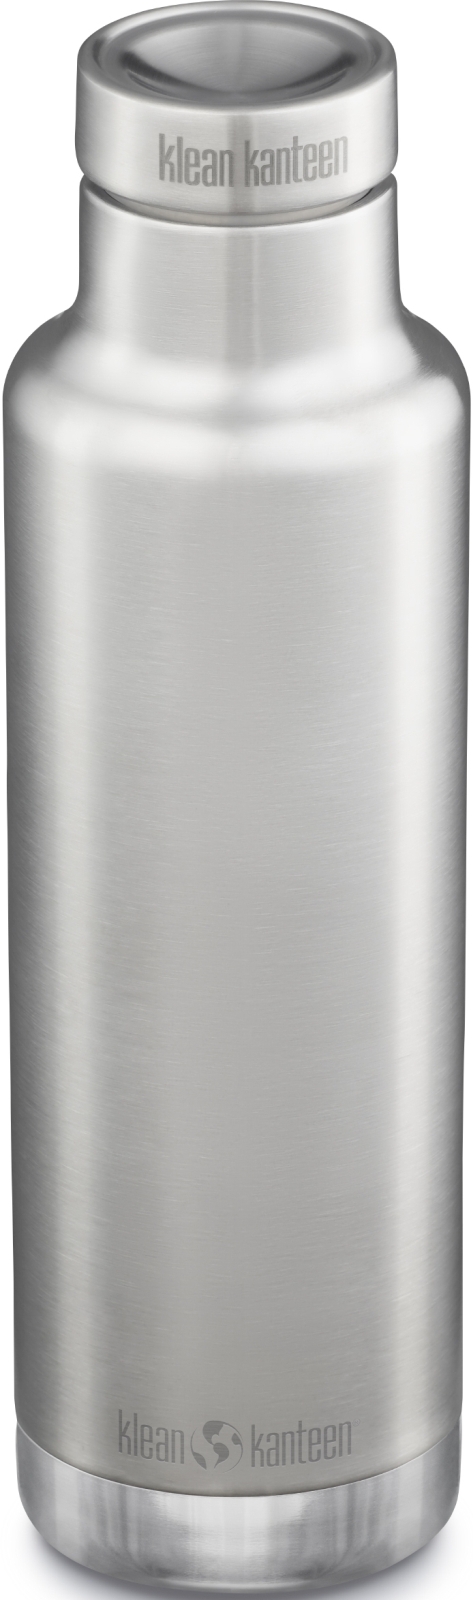 E-shop Klean Kanteen Insulated Classic Narrow w/Pour Through Cap - Brushed Stainless 750 ml uni